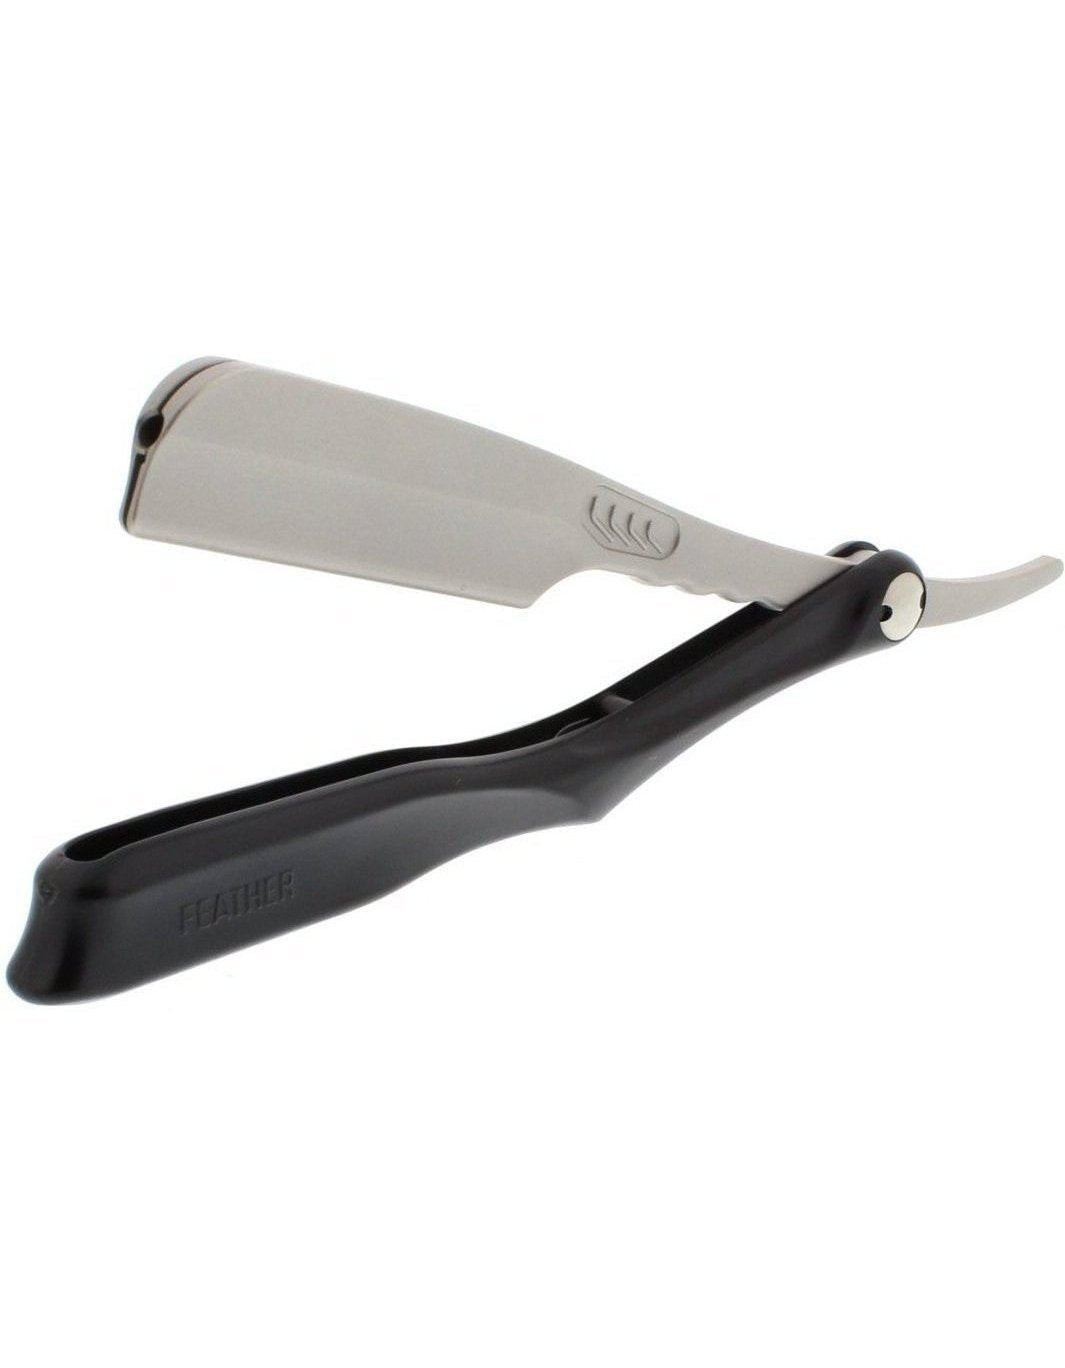 Product image 1 for Feather Artist Club SS Razor, Black